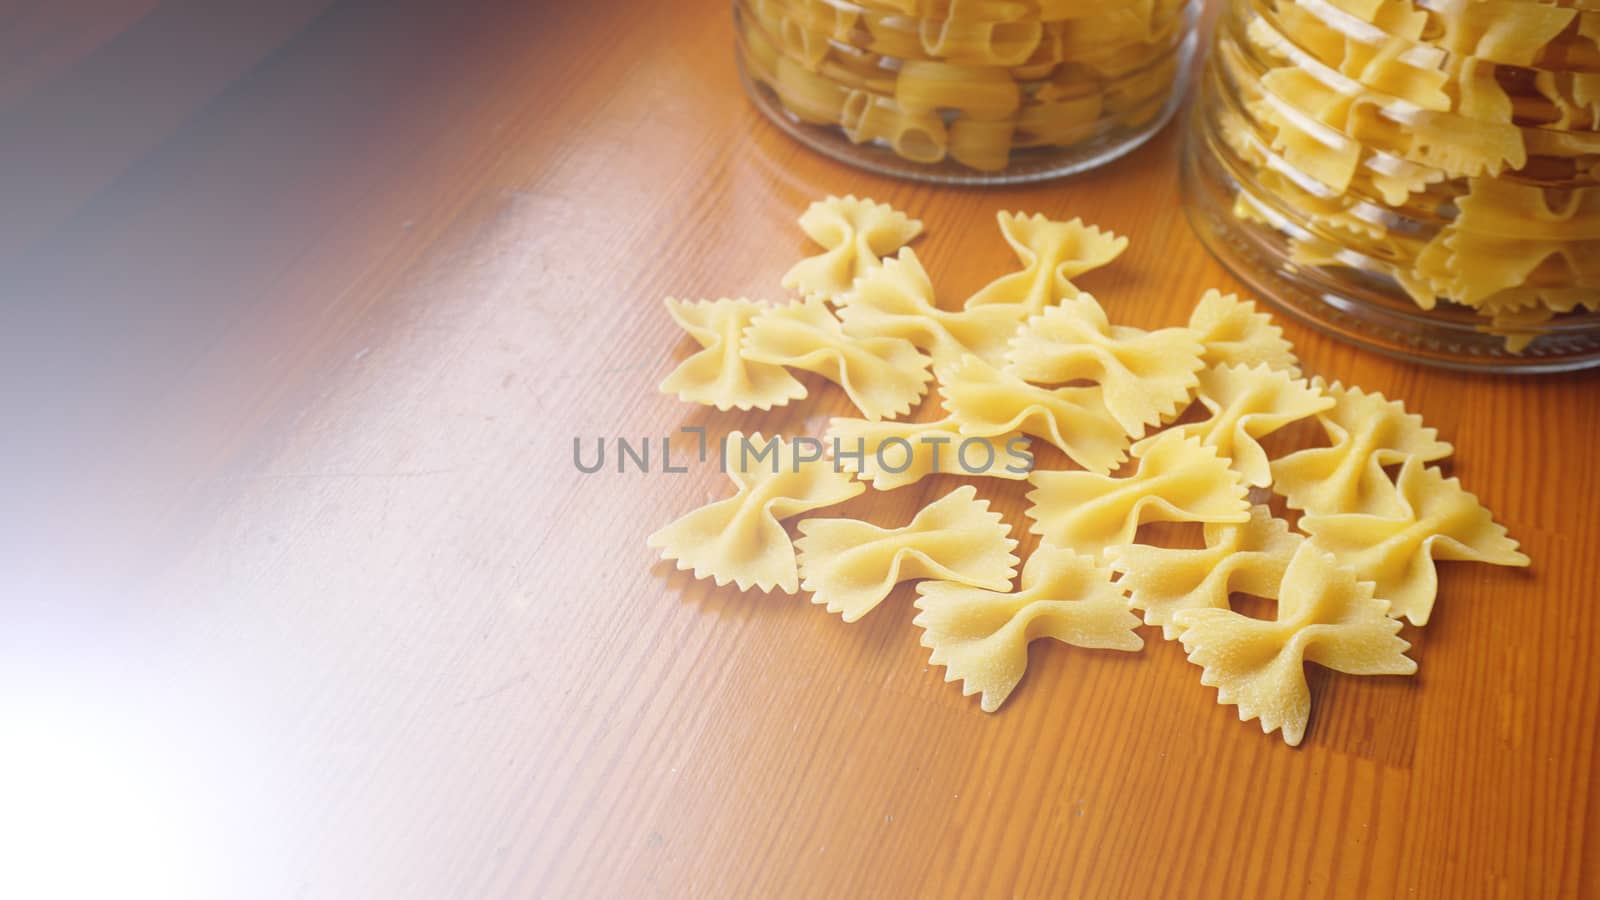 Pasta in the form of bows scattered from glass jar. Italian handmade pasta by natali_brill